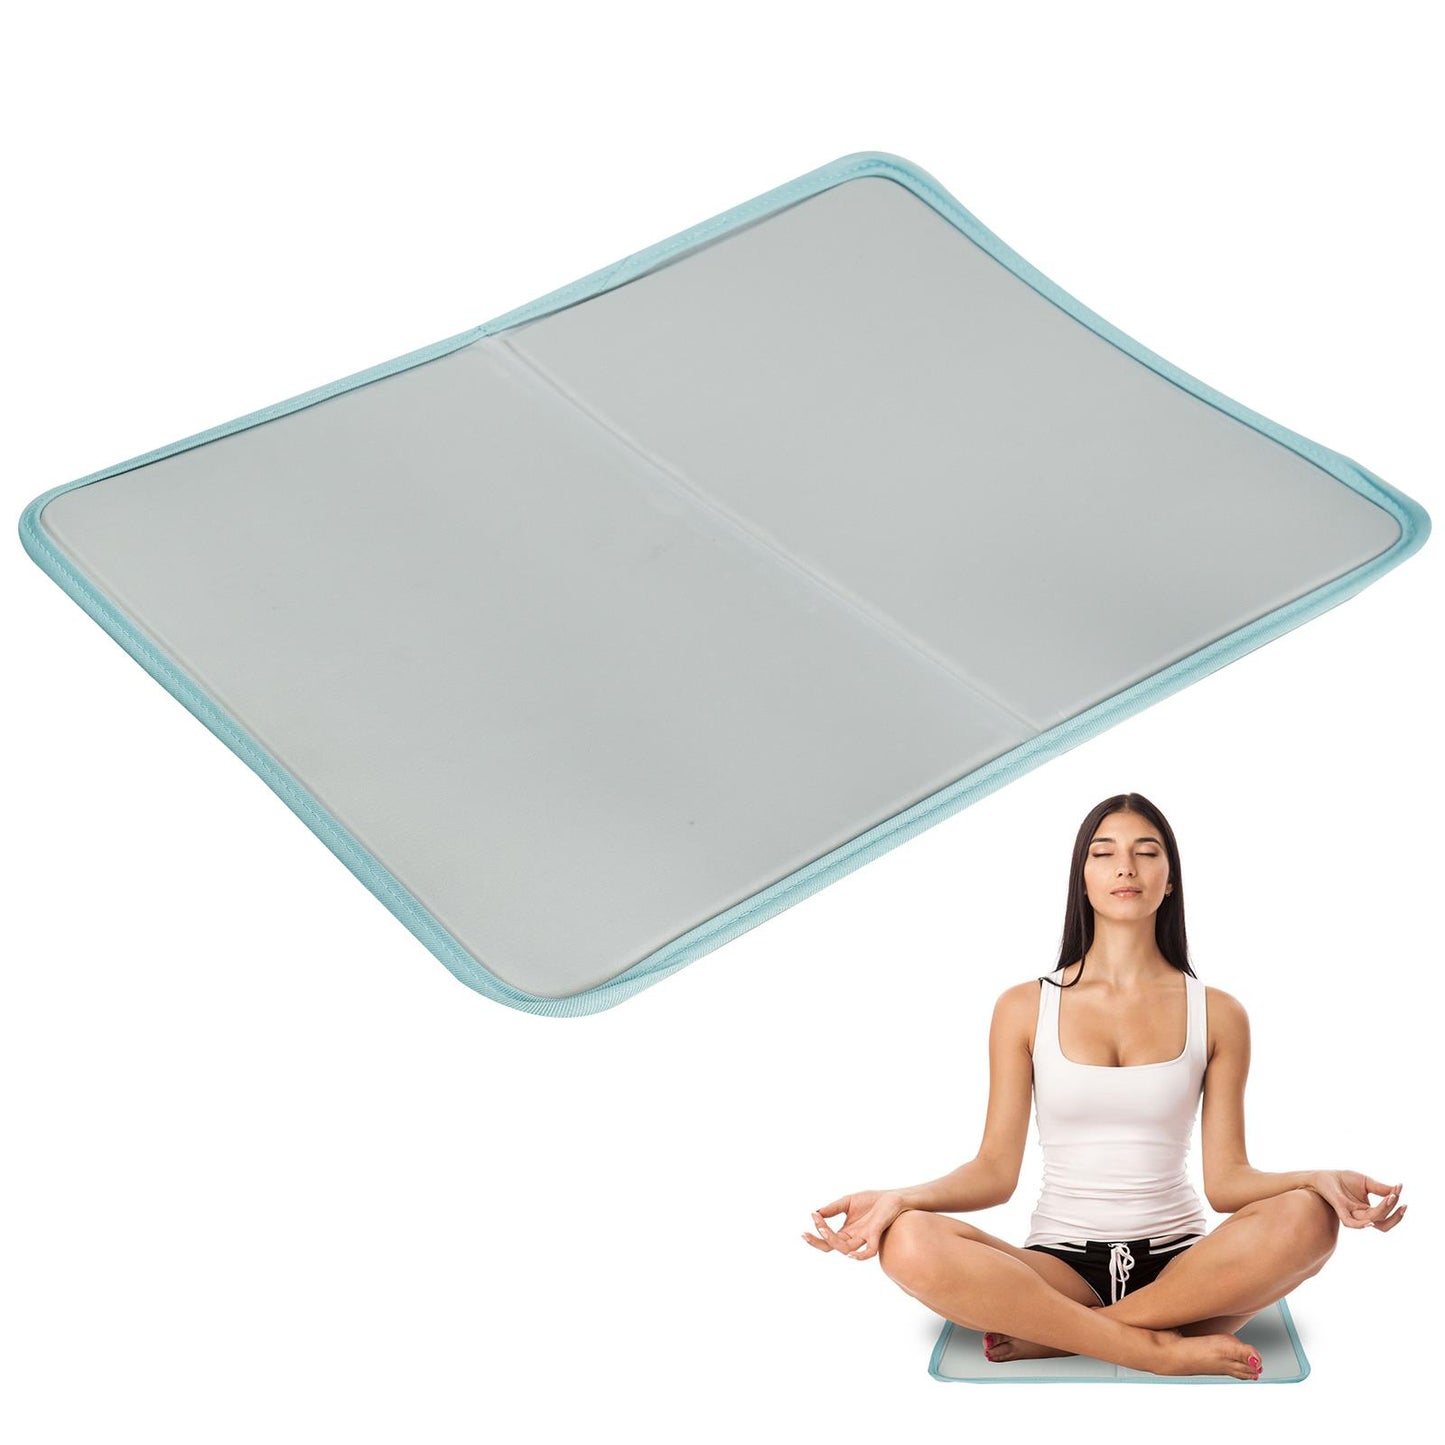 Large Cooling Gel Mat For Beds And Couches